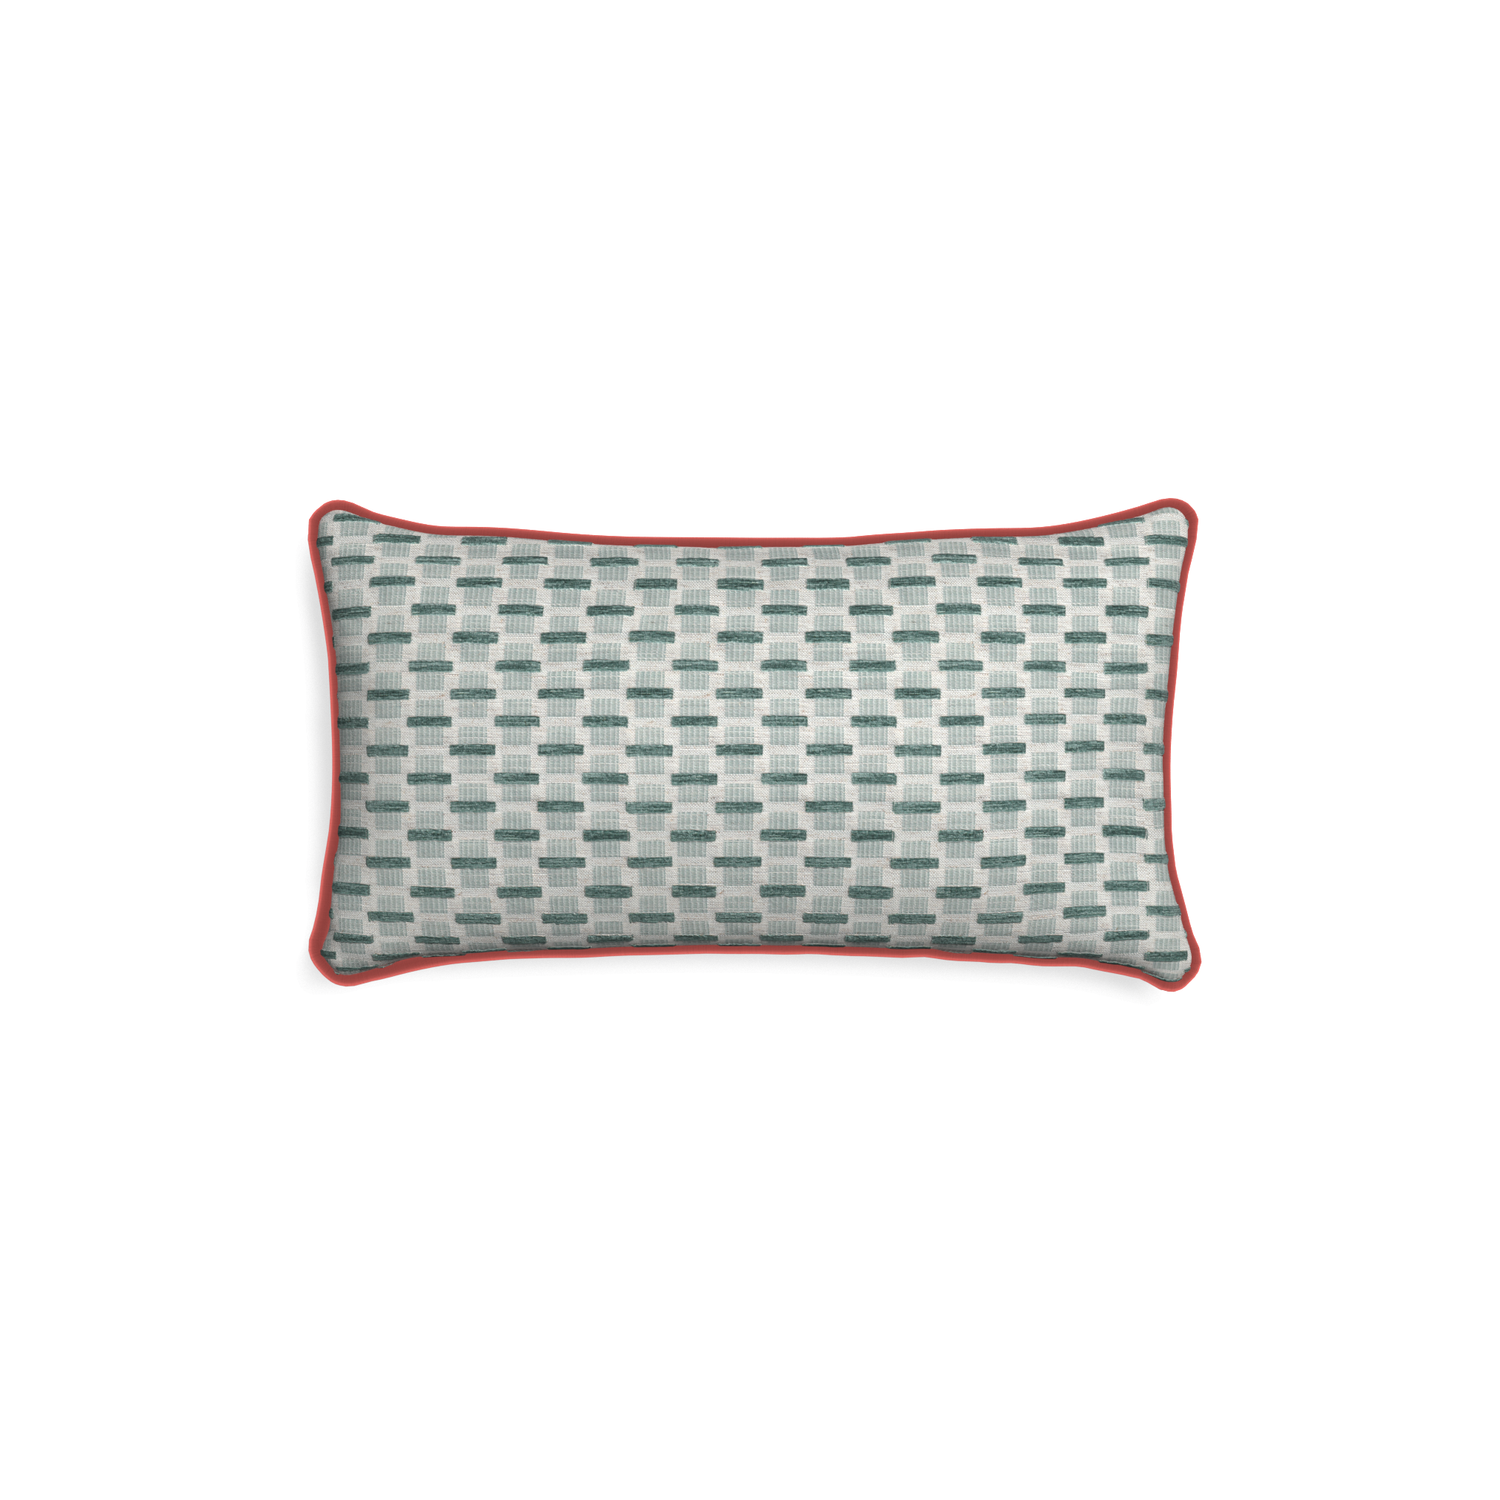 Petite-lumbar willow mint custom green geometric chenillepillow with c piping on white background